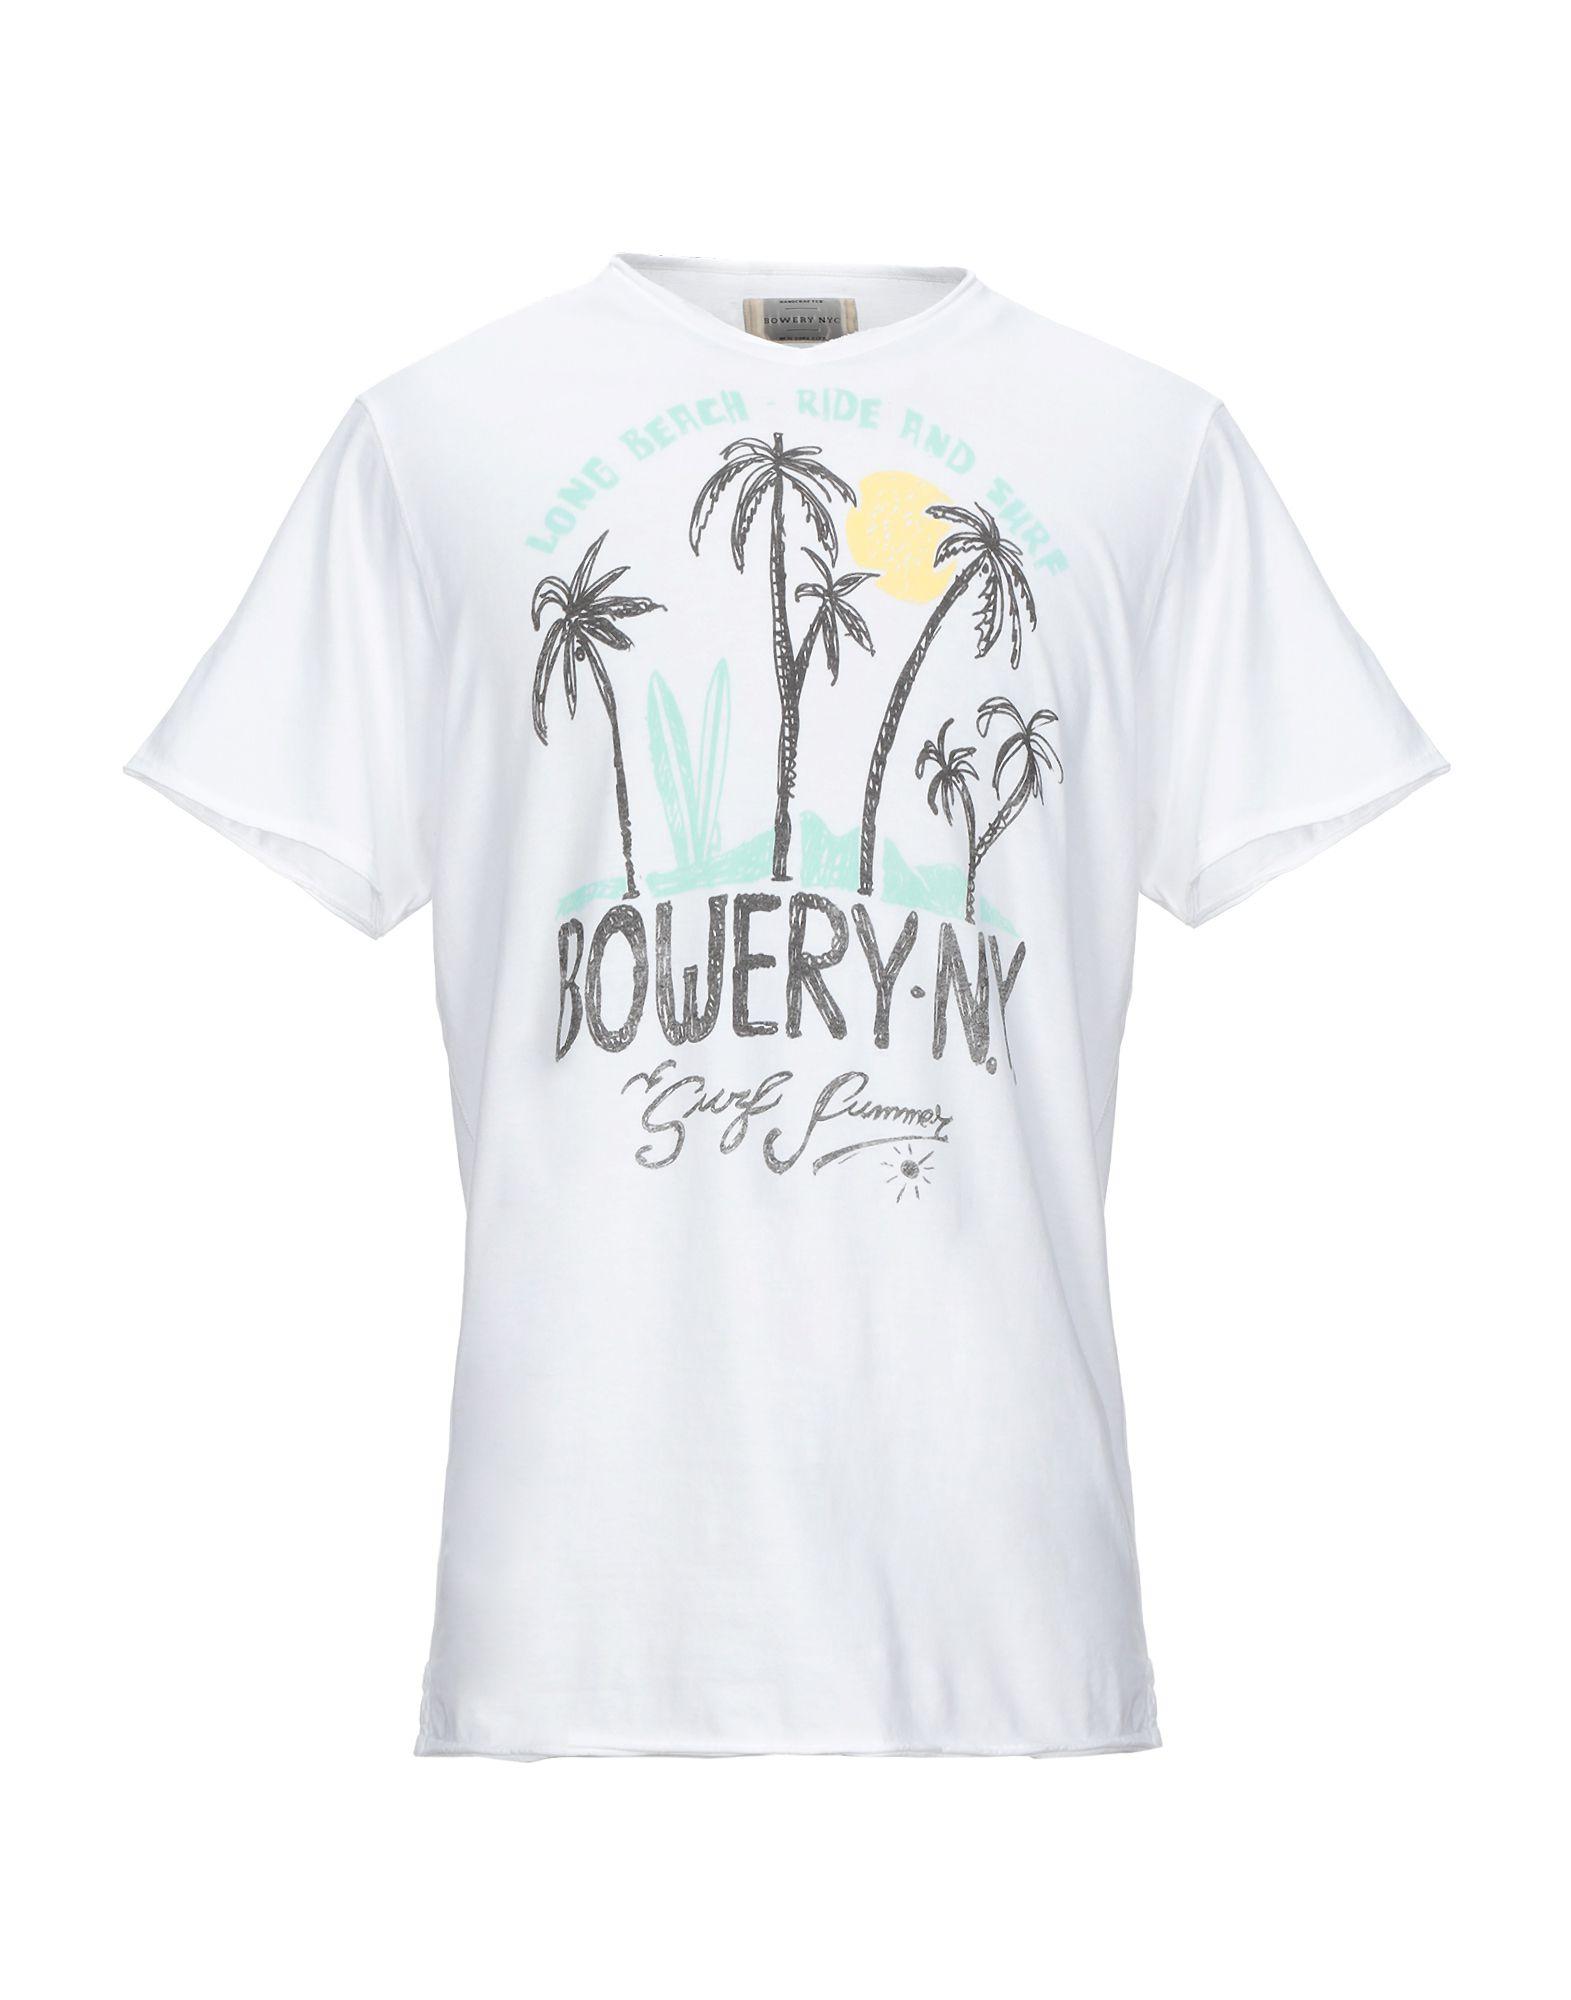 Bowery Supply Co. T-shirt in White for Men - Lyst